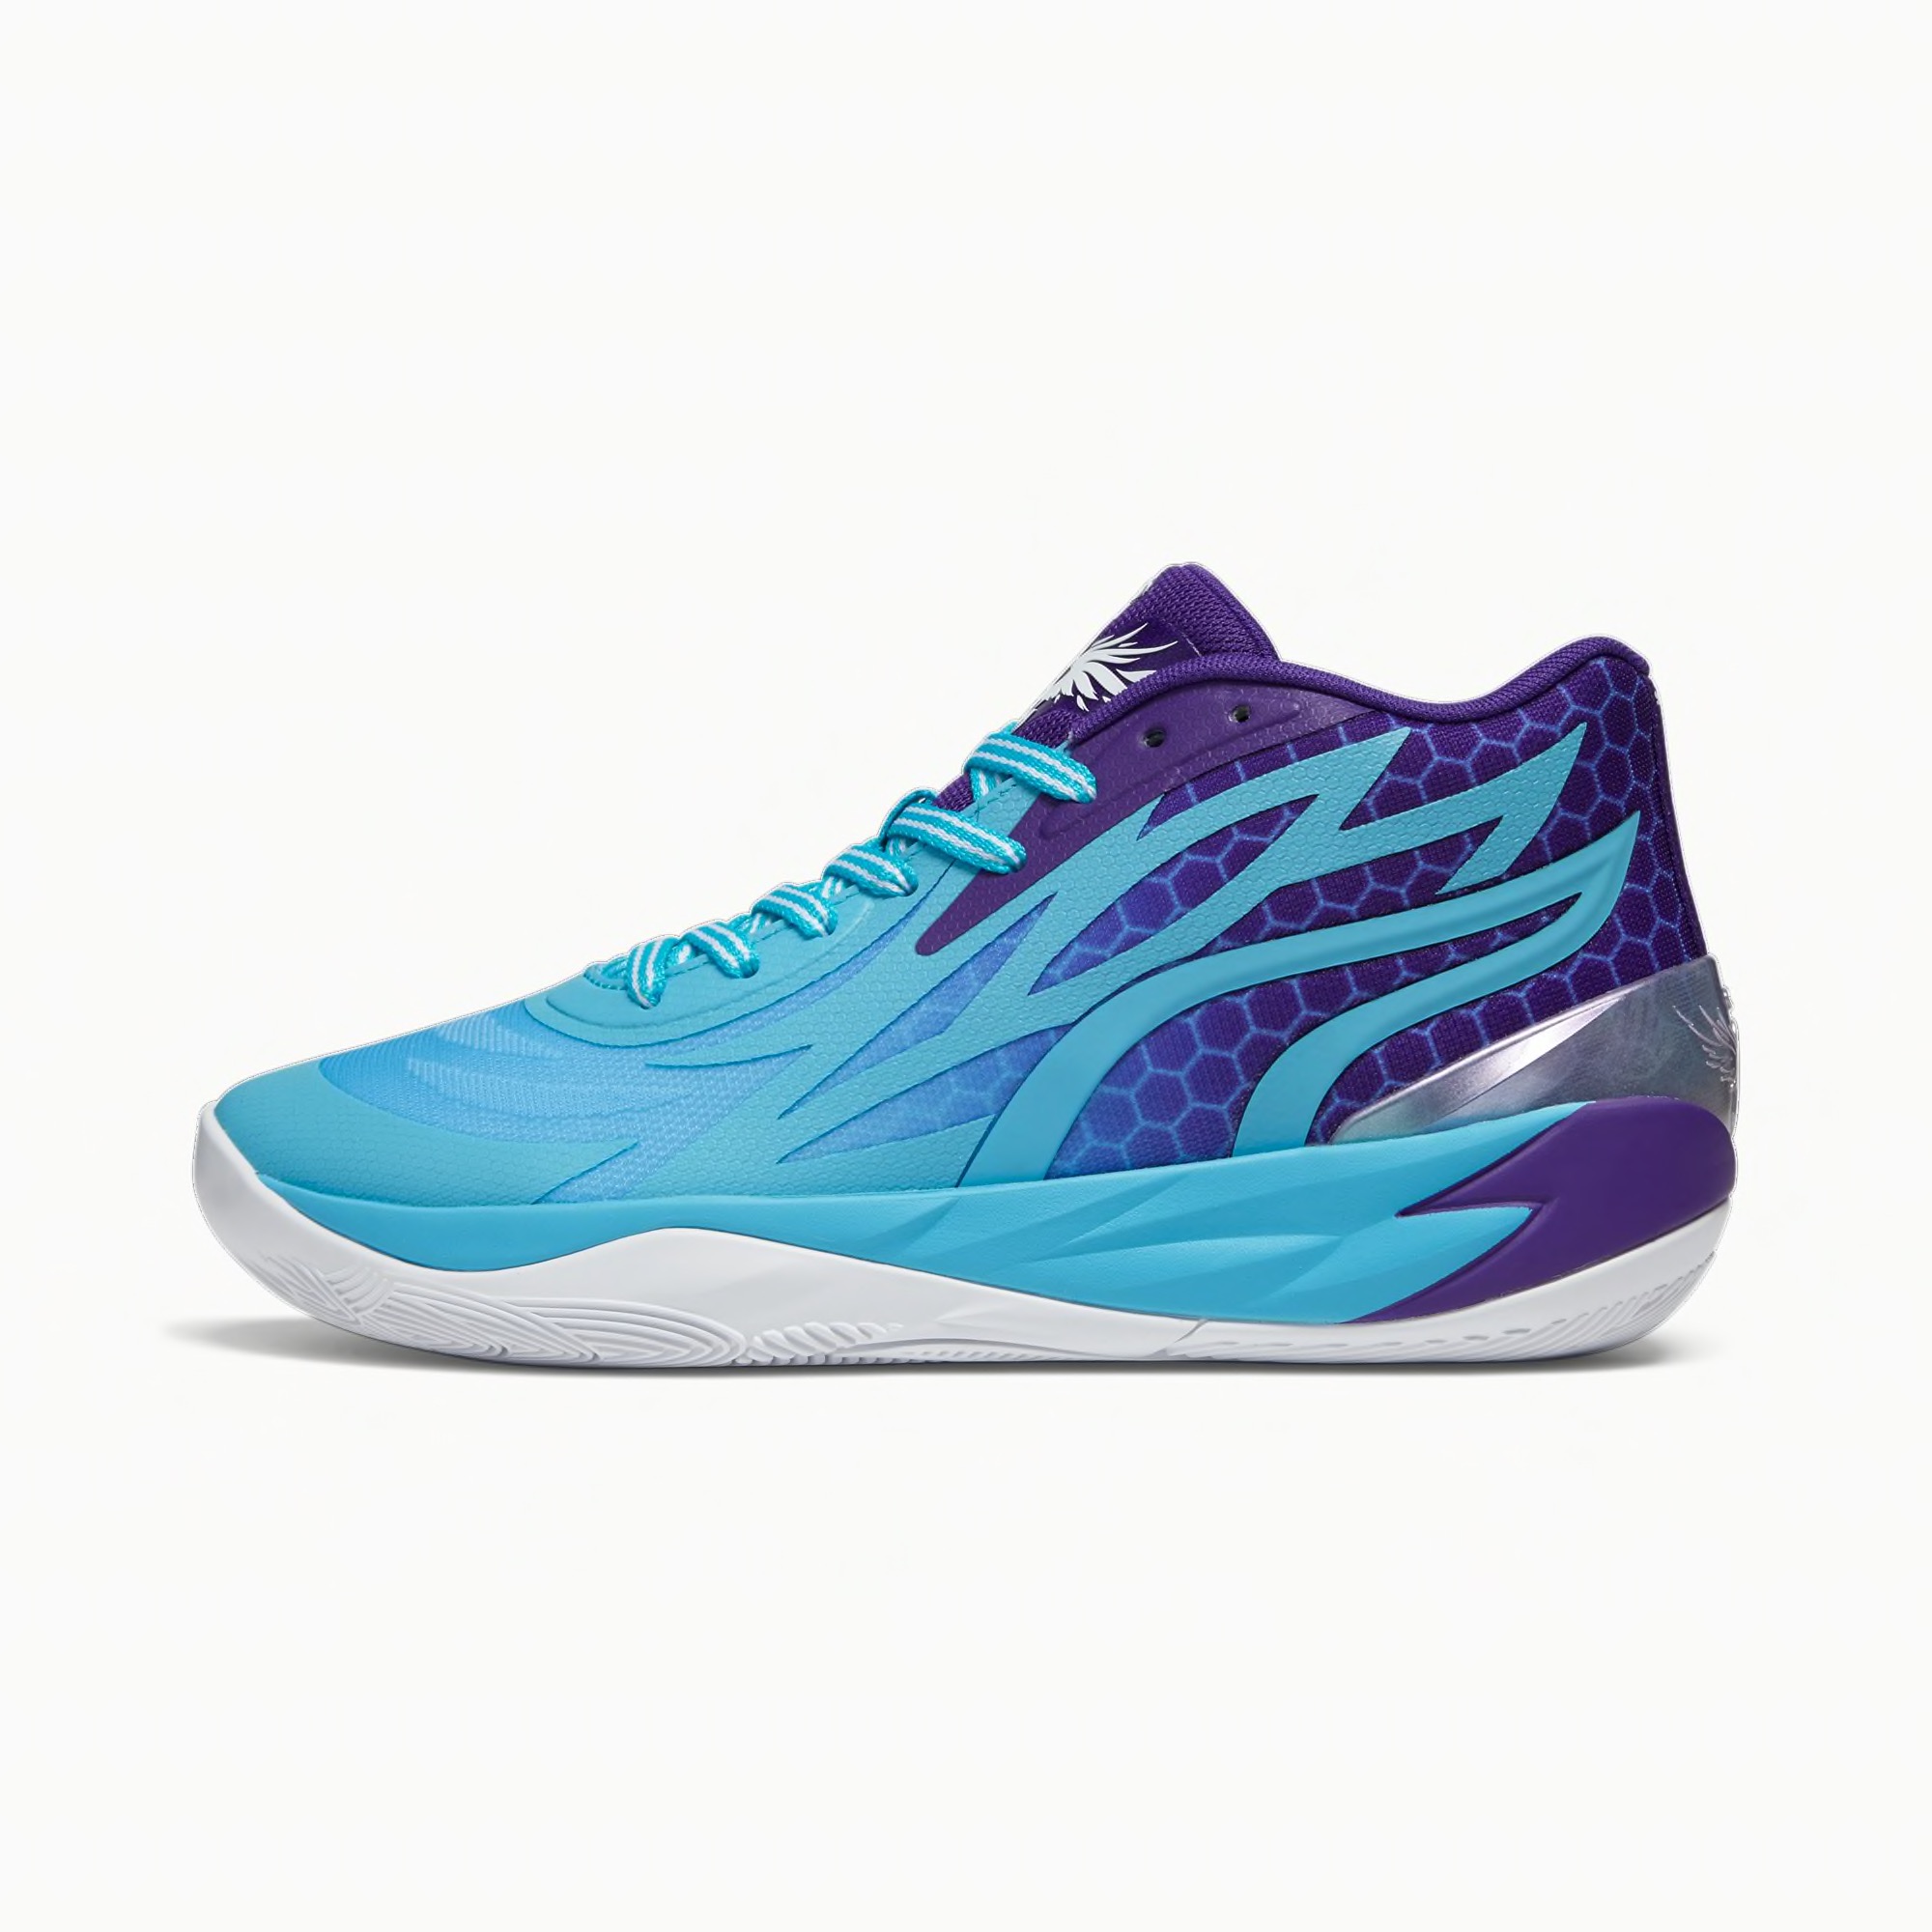 SNX DLX: The Week’s Best Sneakers, Feat. LaMello Ball’s Latest Puma ...